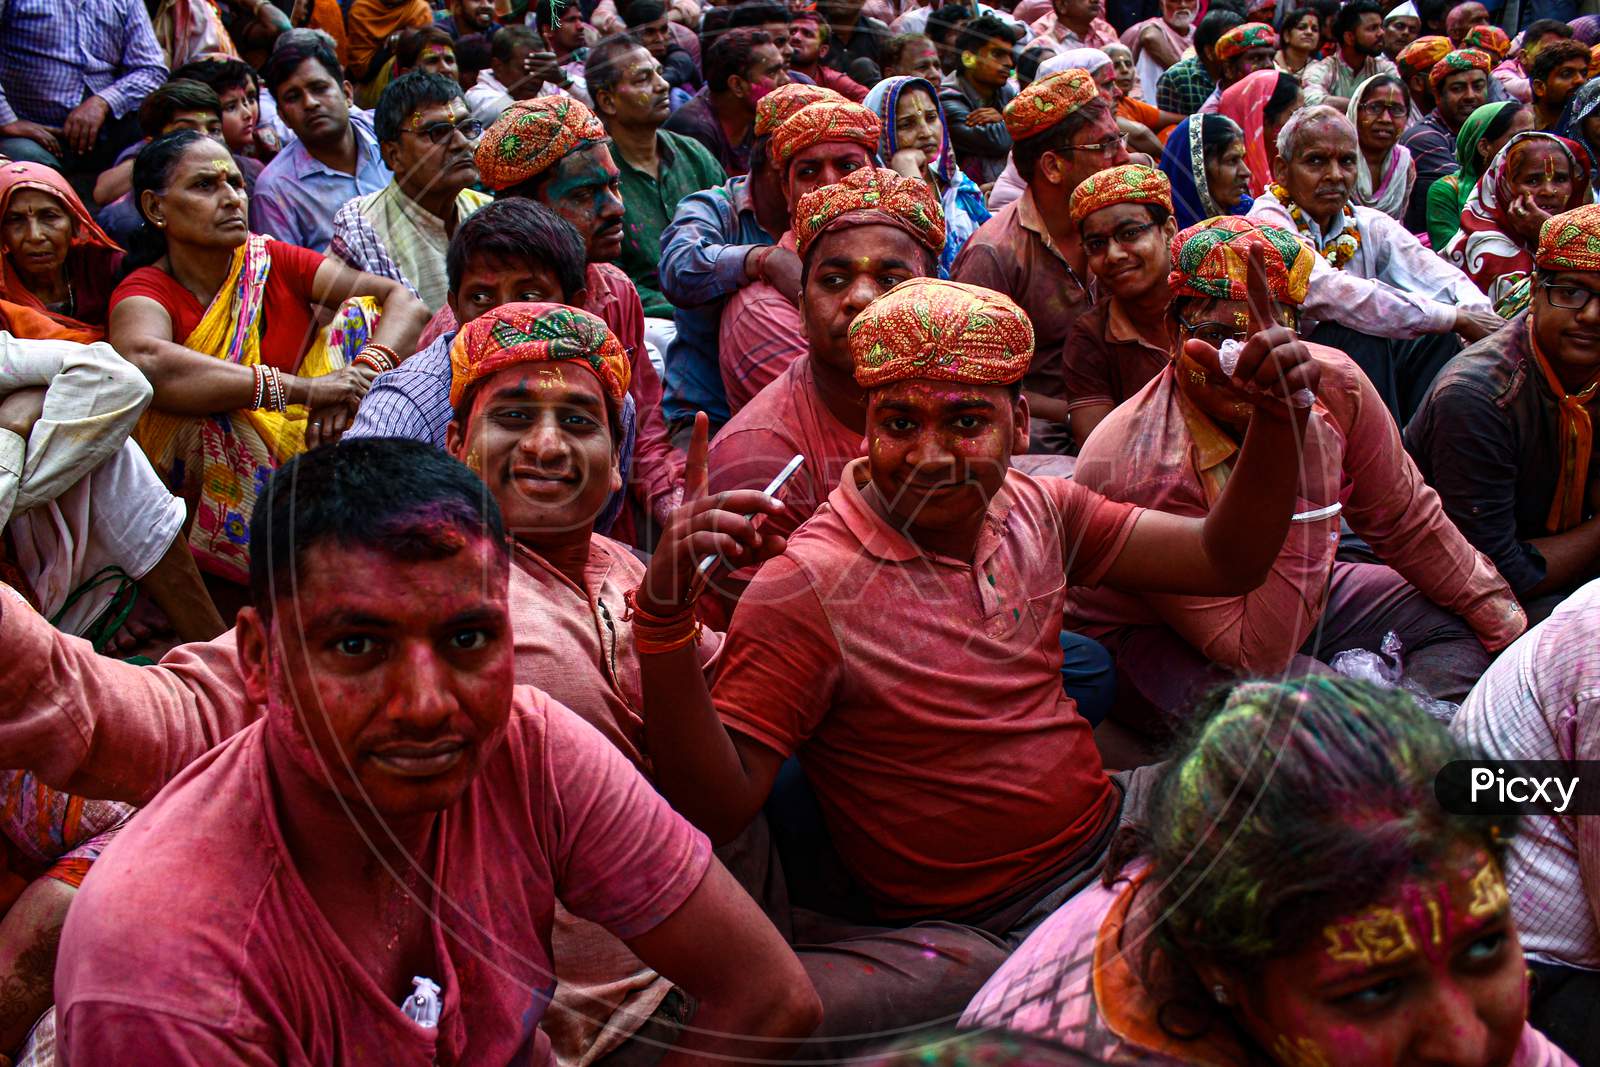 Mathura, Uttar Pradesh/ India- January 6 2020: A Group Of People Gathered On The Streets Of Mathura During The Holi Festival Of Colors. Concepts About Fun, Fun At A Holi Festival.